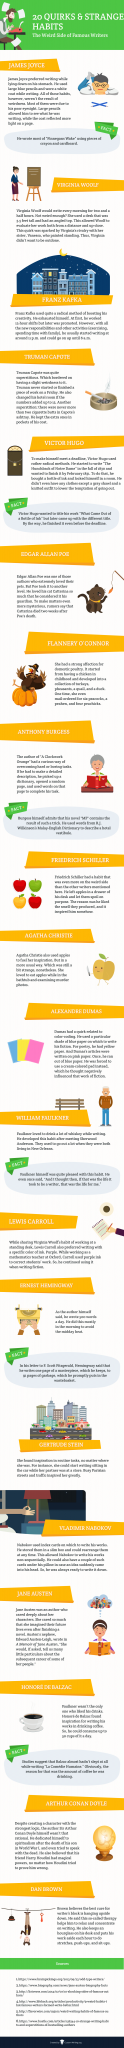 habits of famous writers - infographic